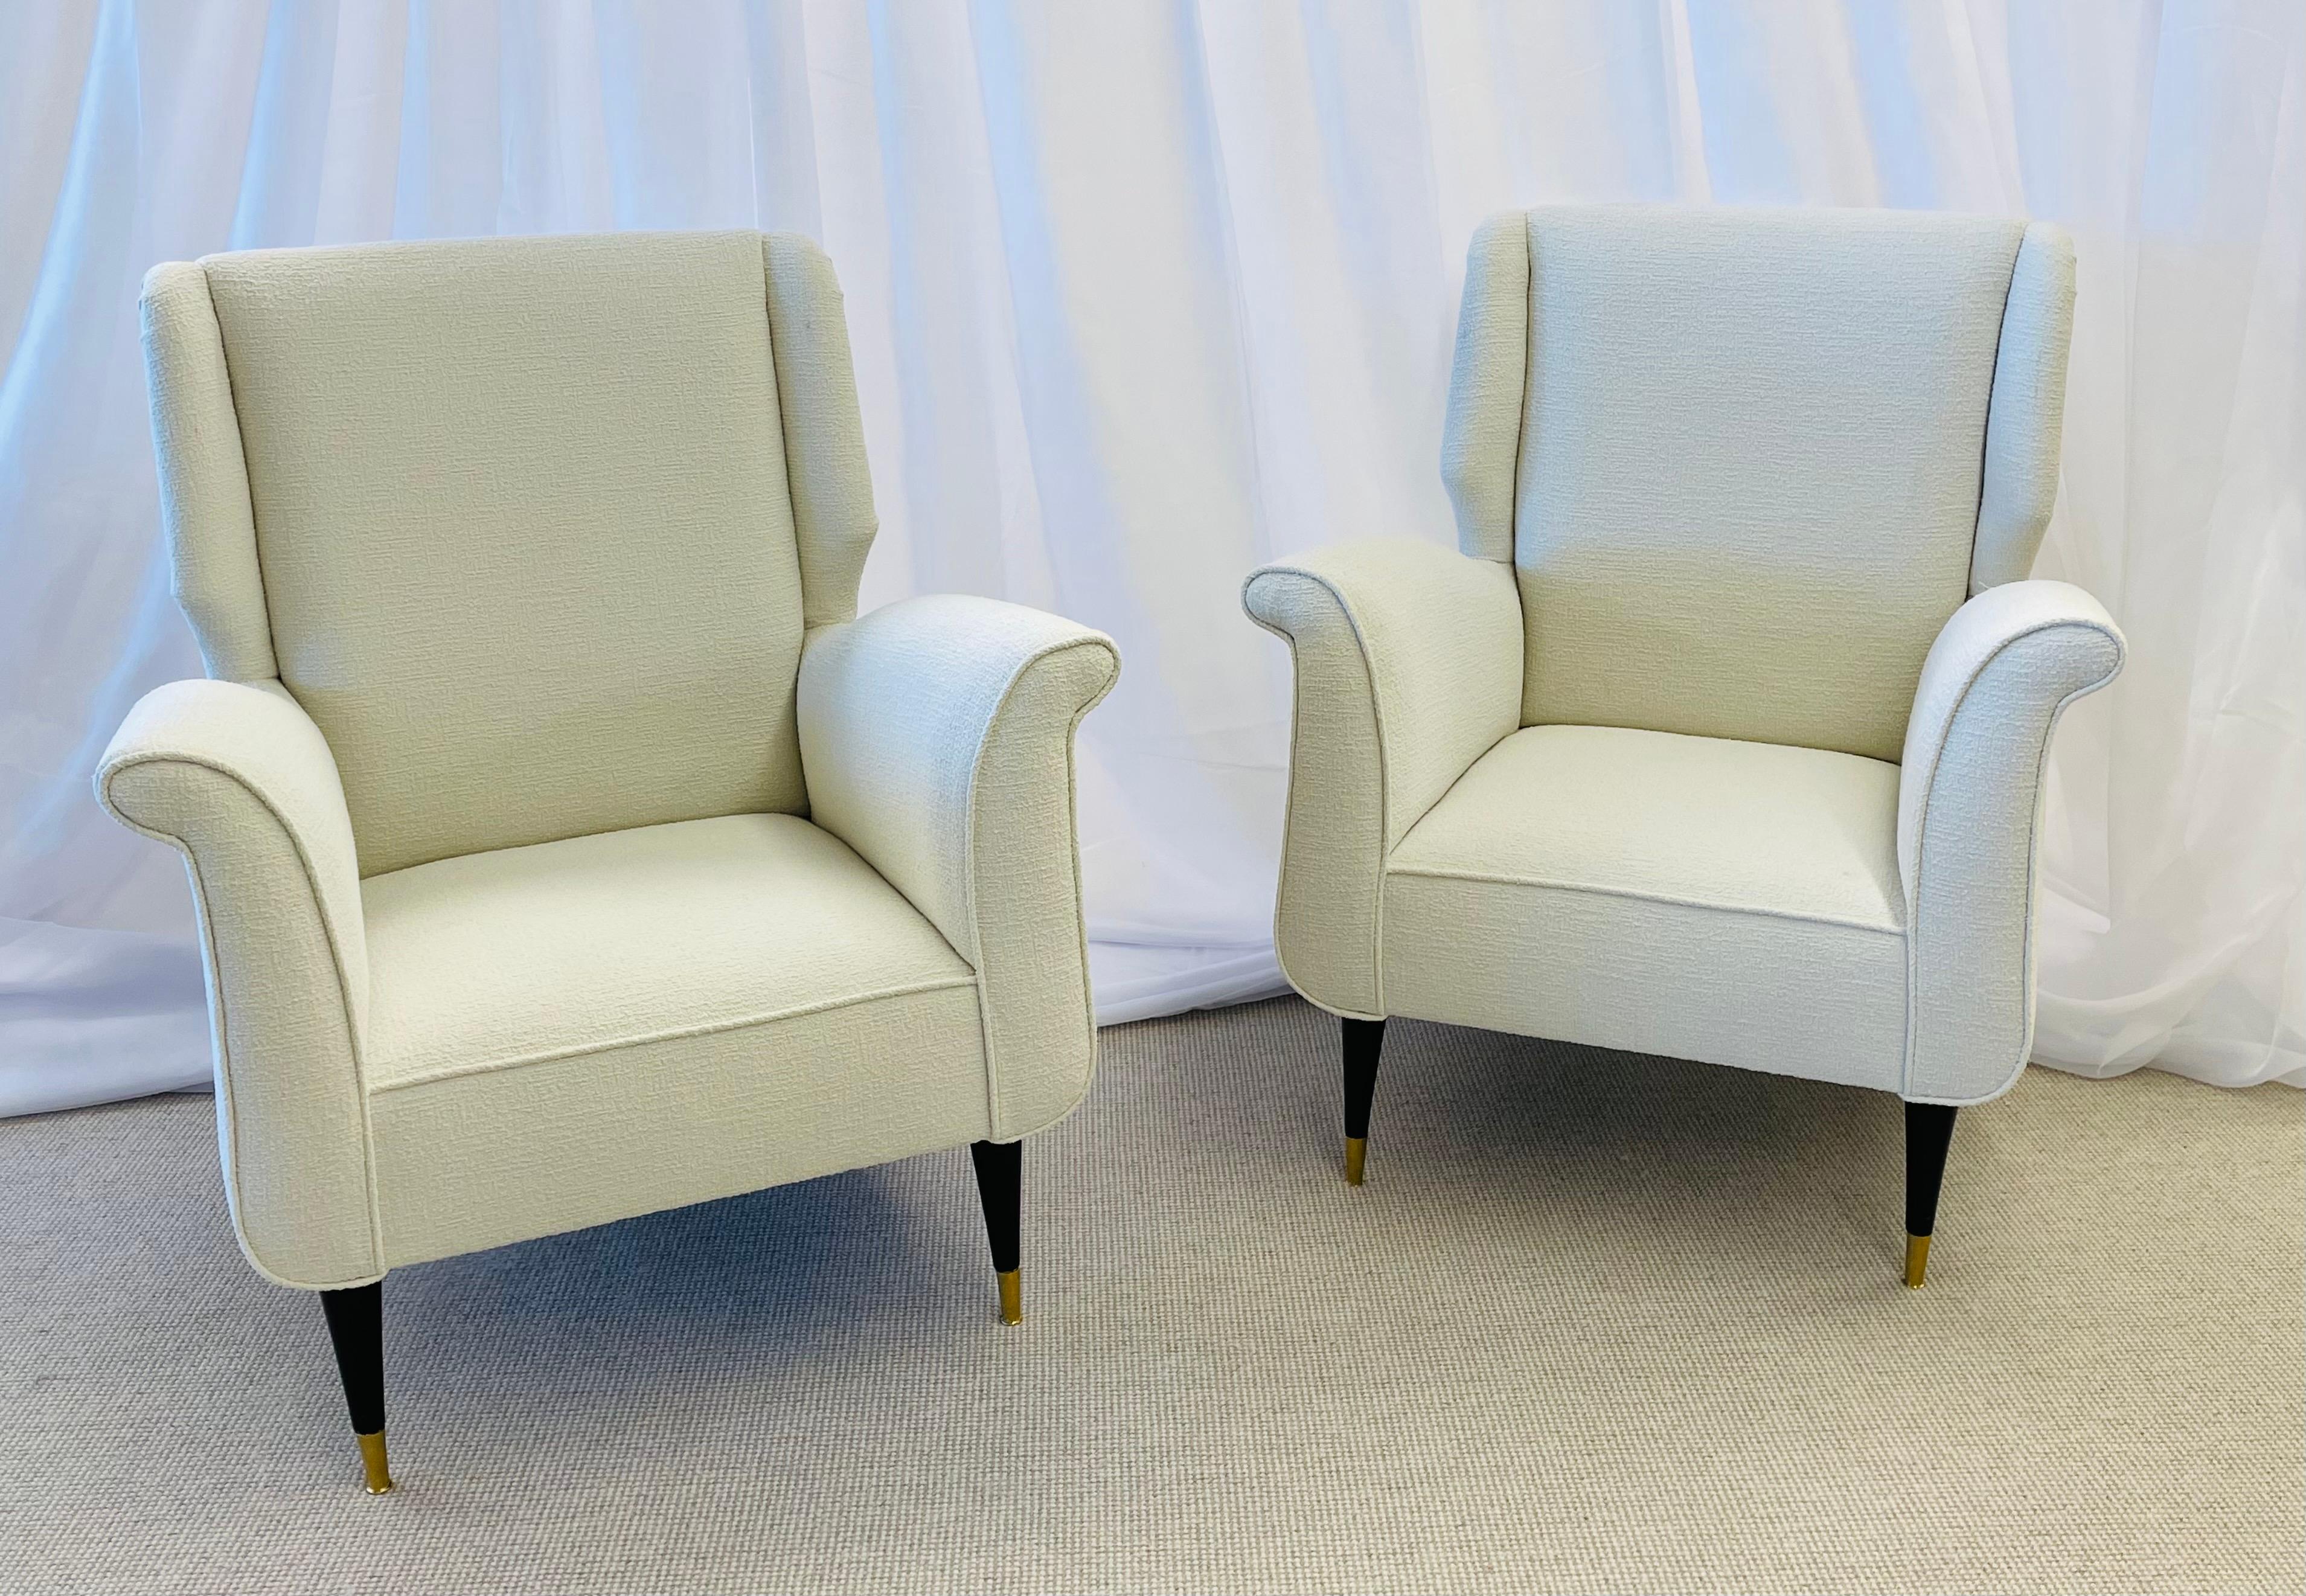 Mid-Century Modern Gio Ponti Style Armchairs, Wingback, a Pair in Kravet Bouclé In Good Condition For Sale In Stamford, CT